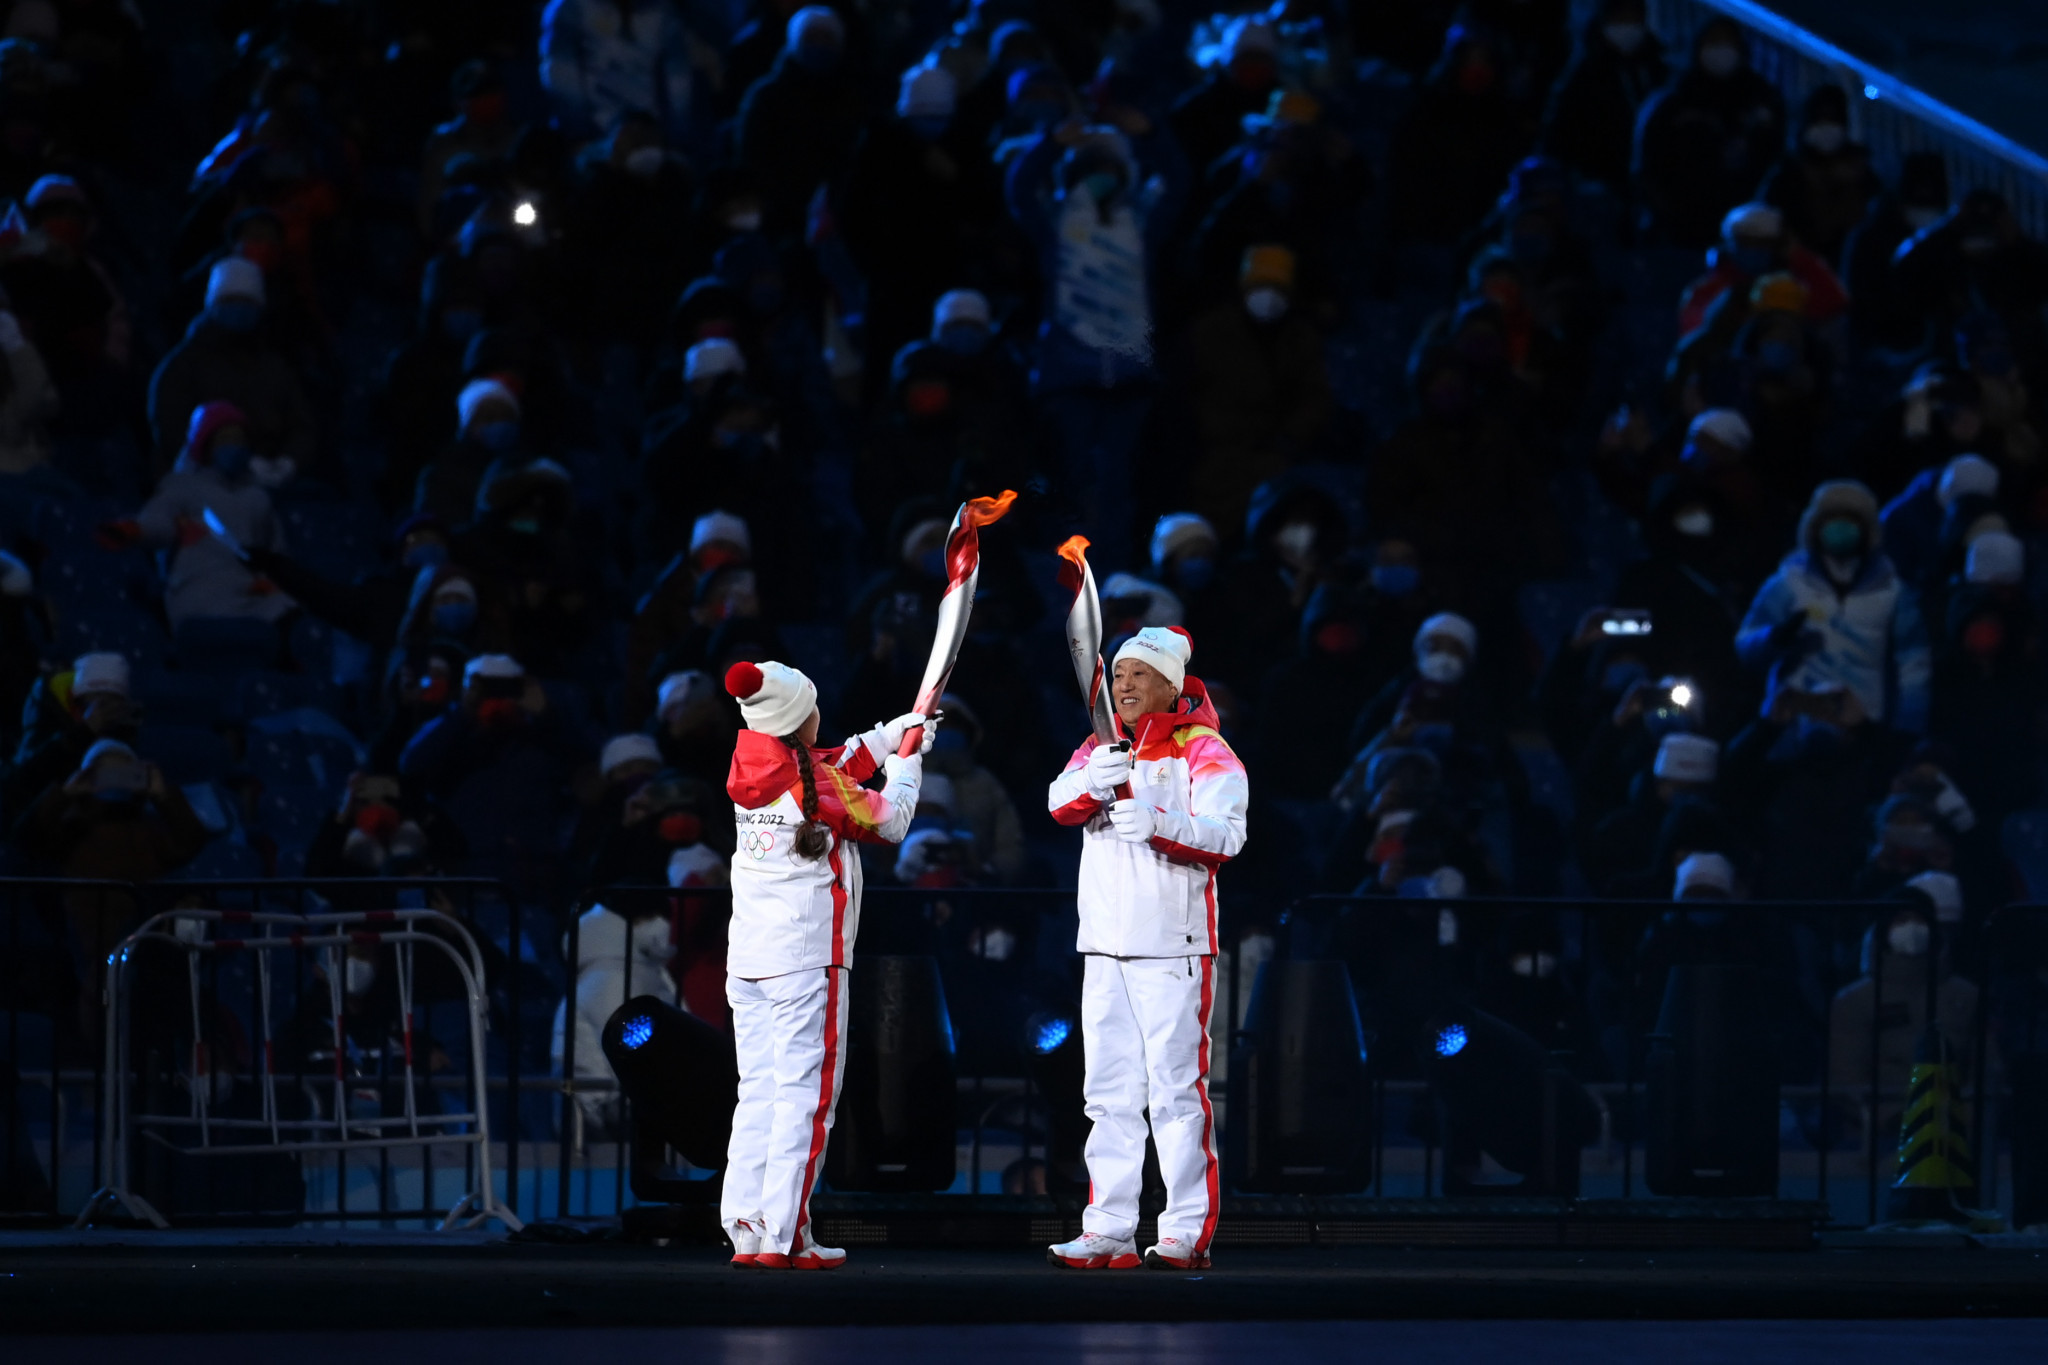 Uyghur cross-country skier Dinigeer Yilamujiang and Nordic combined competitor Zhao Jiawen placed the Olympic Torch on a receptacle to complete the Olympic Torch Relay ©Getty Images 